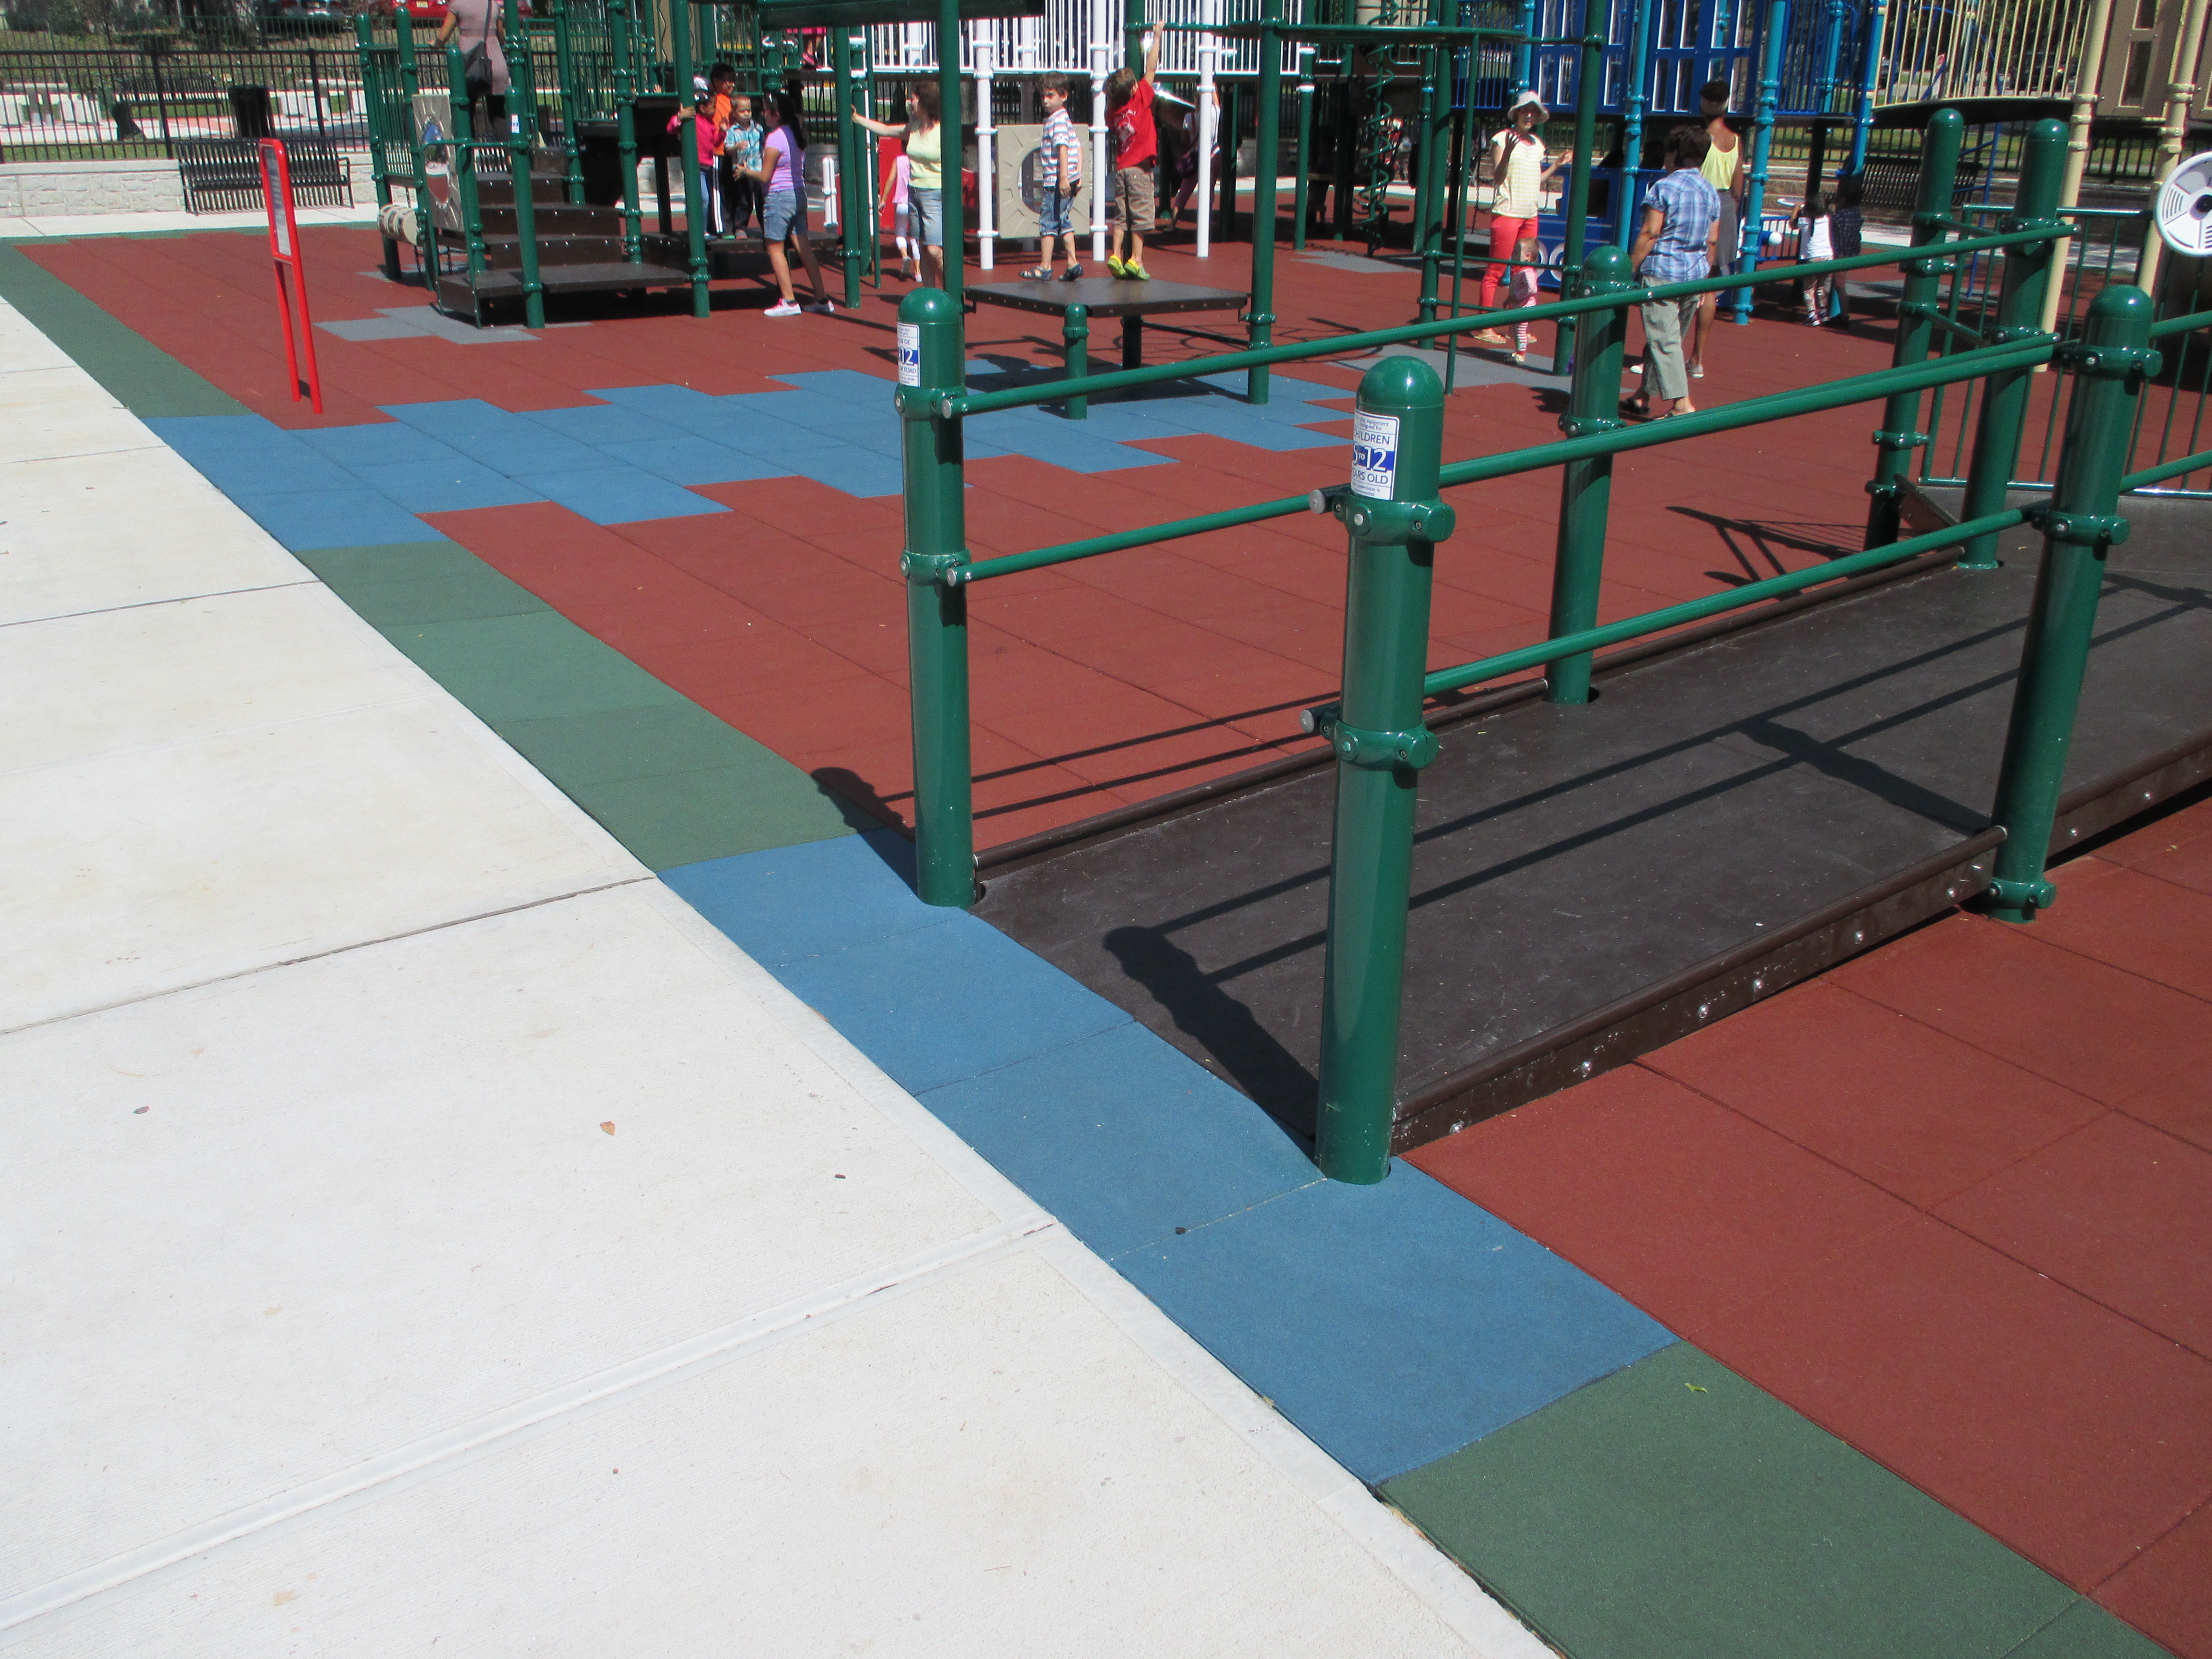 Wheelchair accessible playground tiles that is ADA compliant